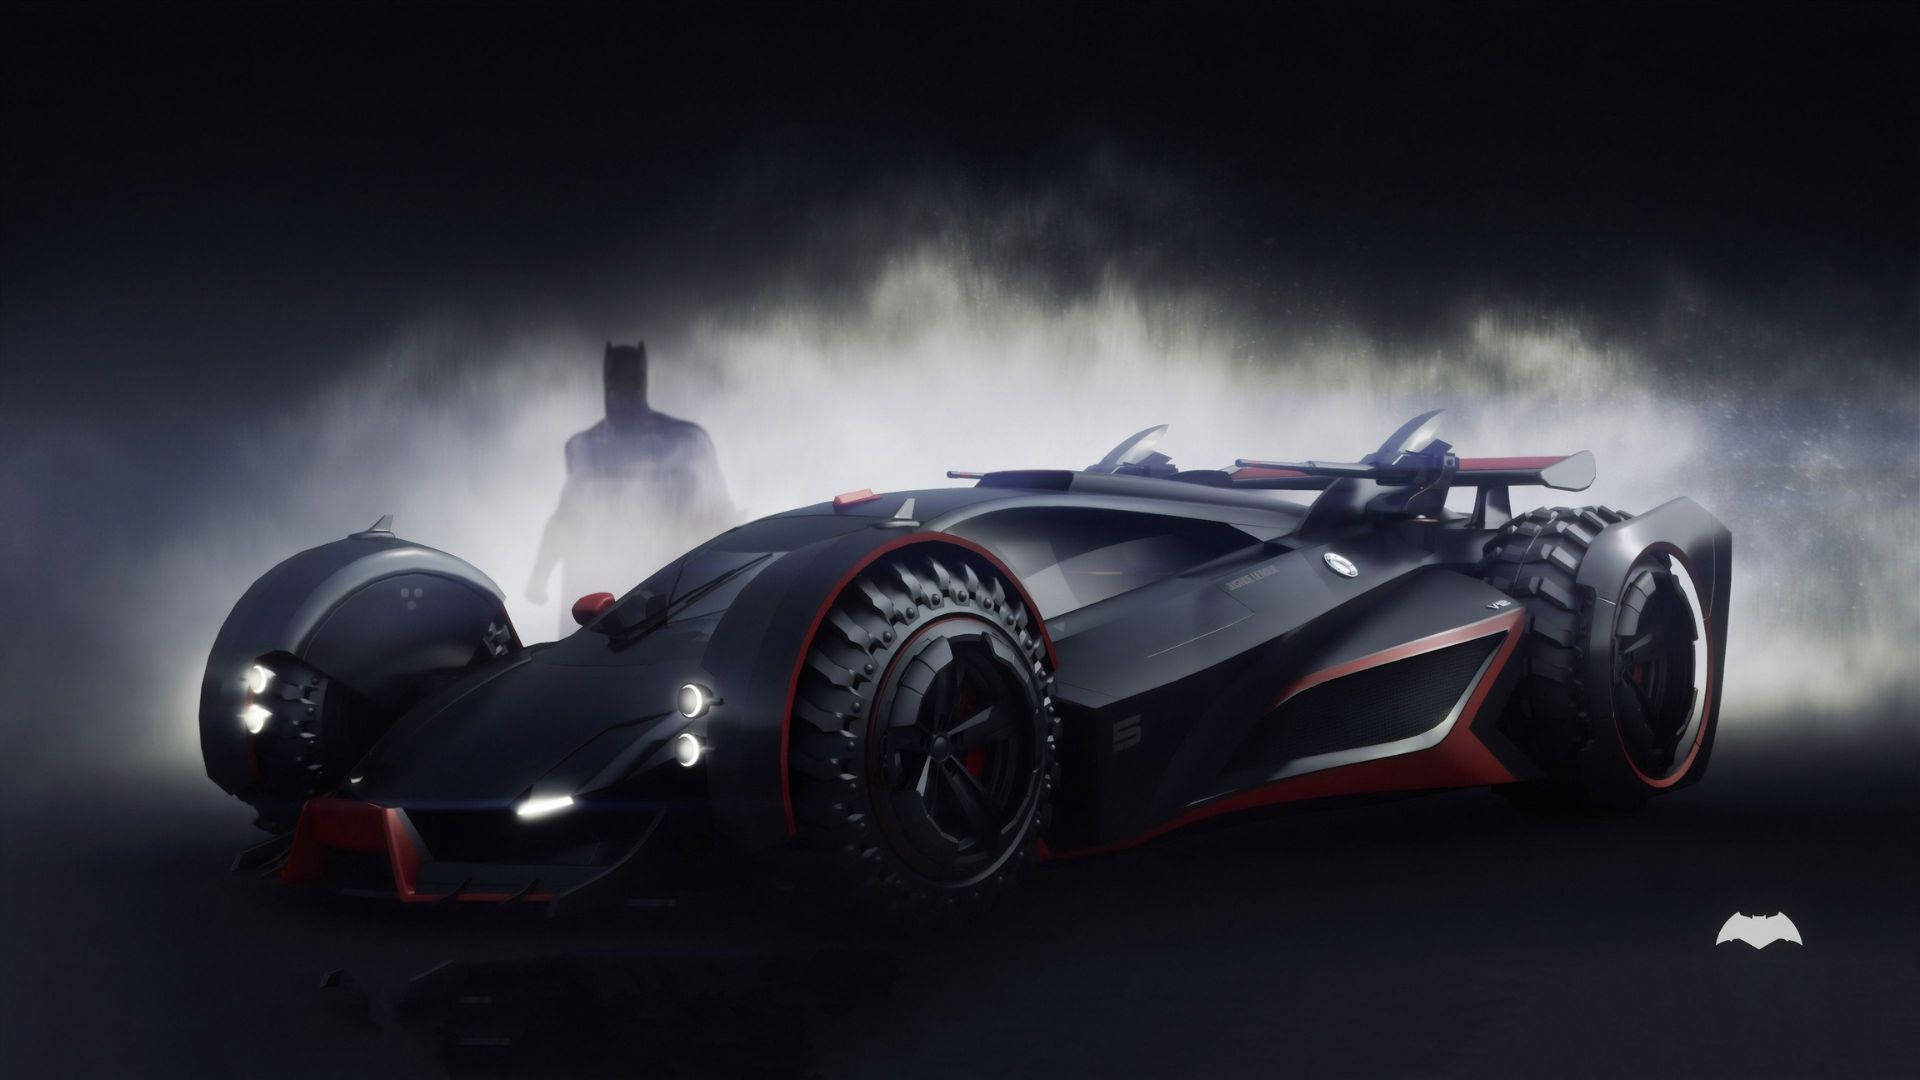 Batmobile In The Foggy Place Wallpaper